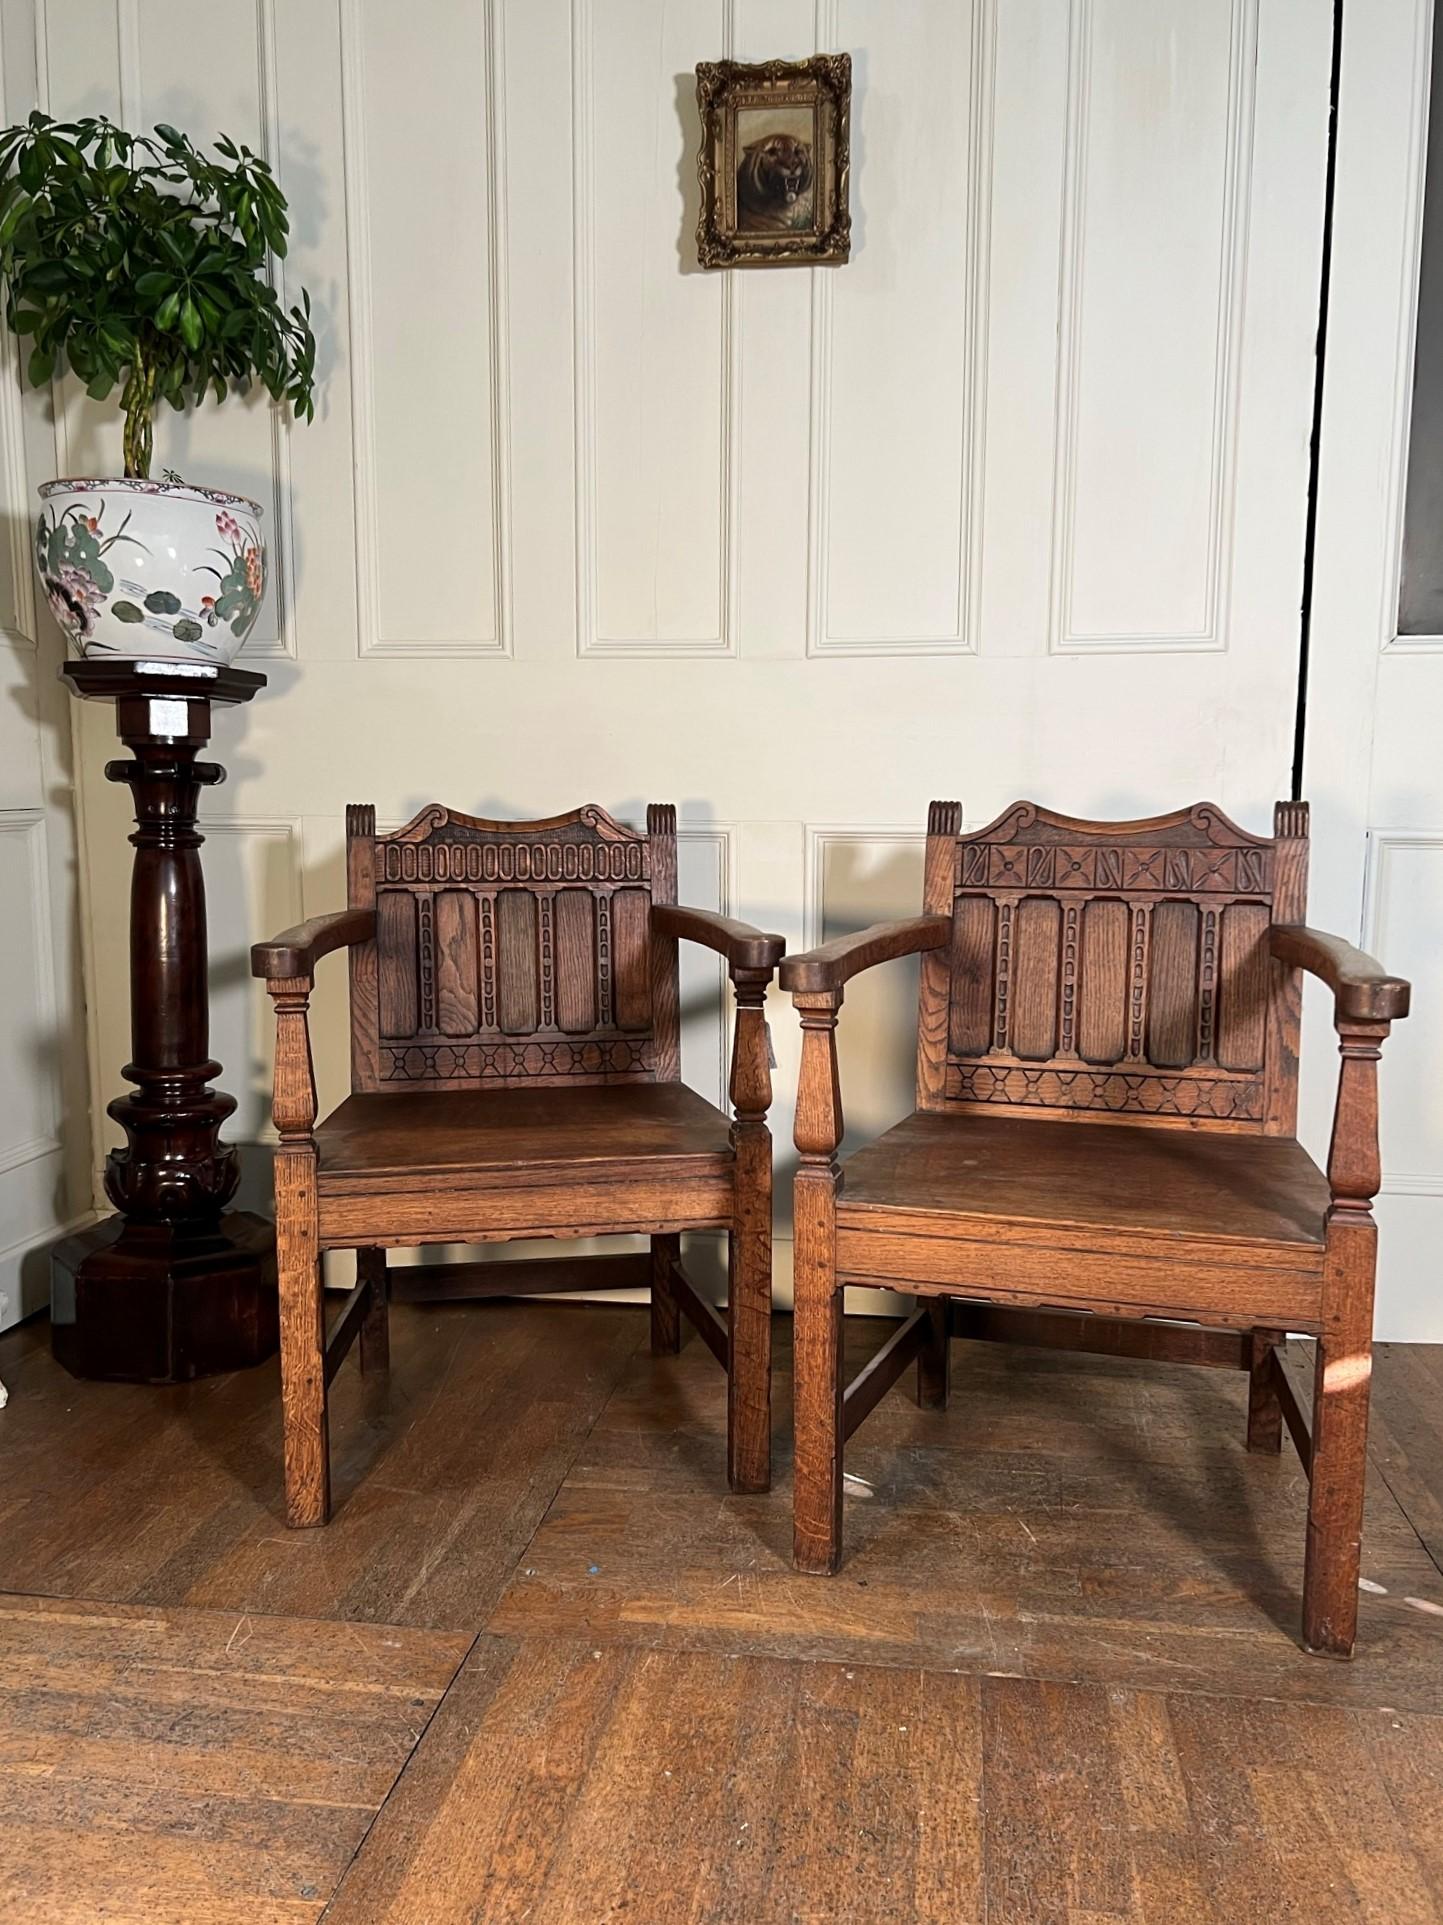 Near pair of early 20th century oak hall chairs.

Purchased from Bishton Hall, Staffordshire, UK. 

Top quality sturdy armchairs with geometric relief carving.

Measurements: 82cm H x 57cm W x 44cm D
(Measurements are approximate and are